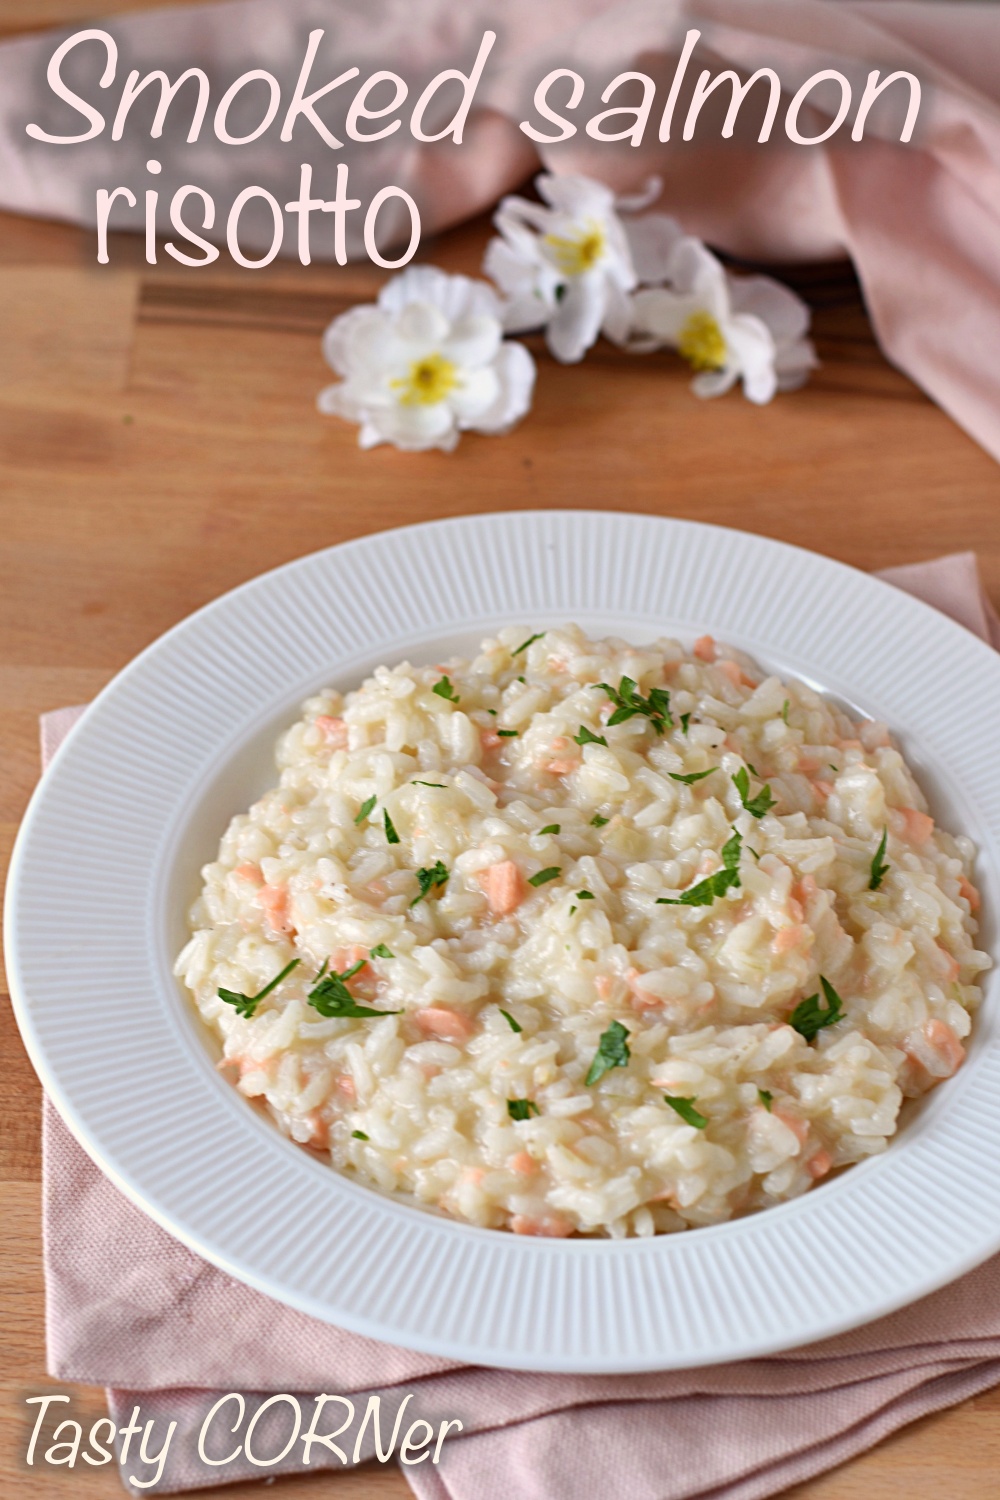 en_v_ smoked salmon risotto italian recipe for a creamy seafood risotto by tasty corner